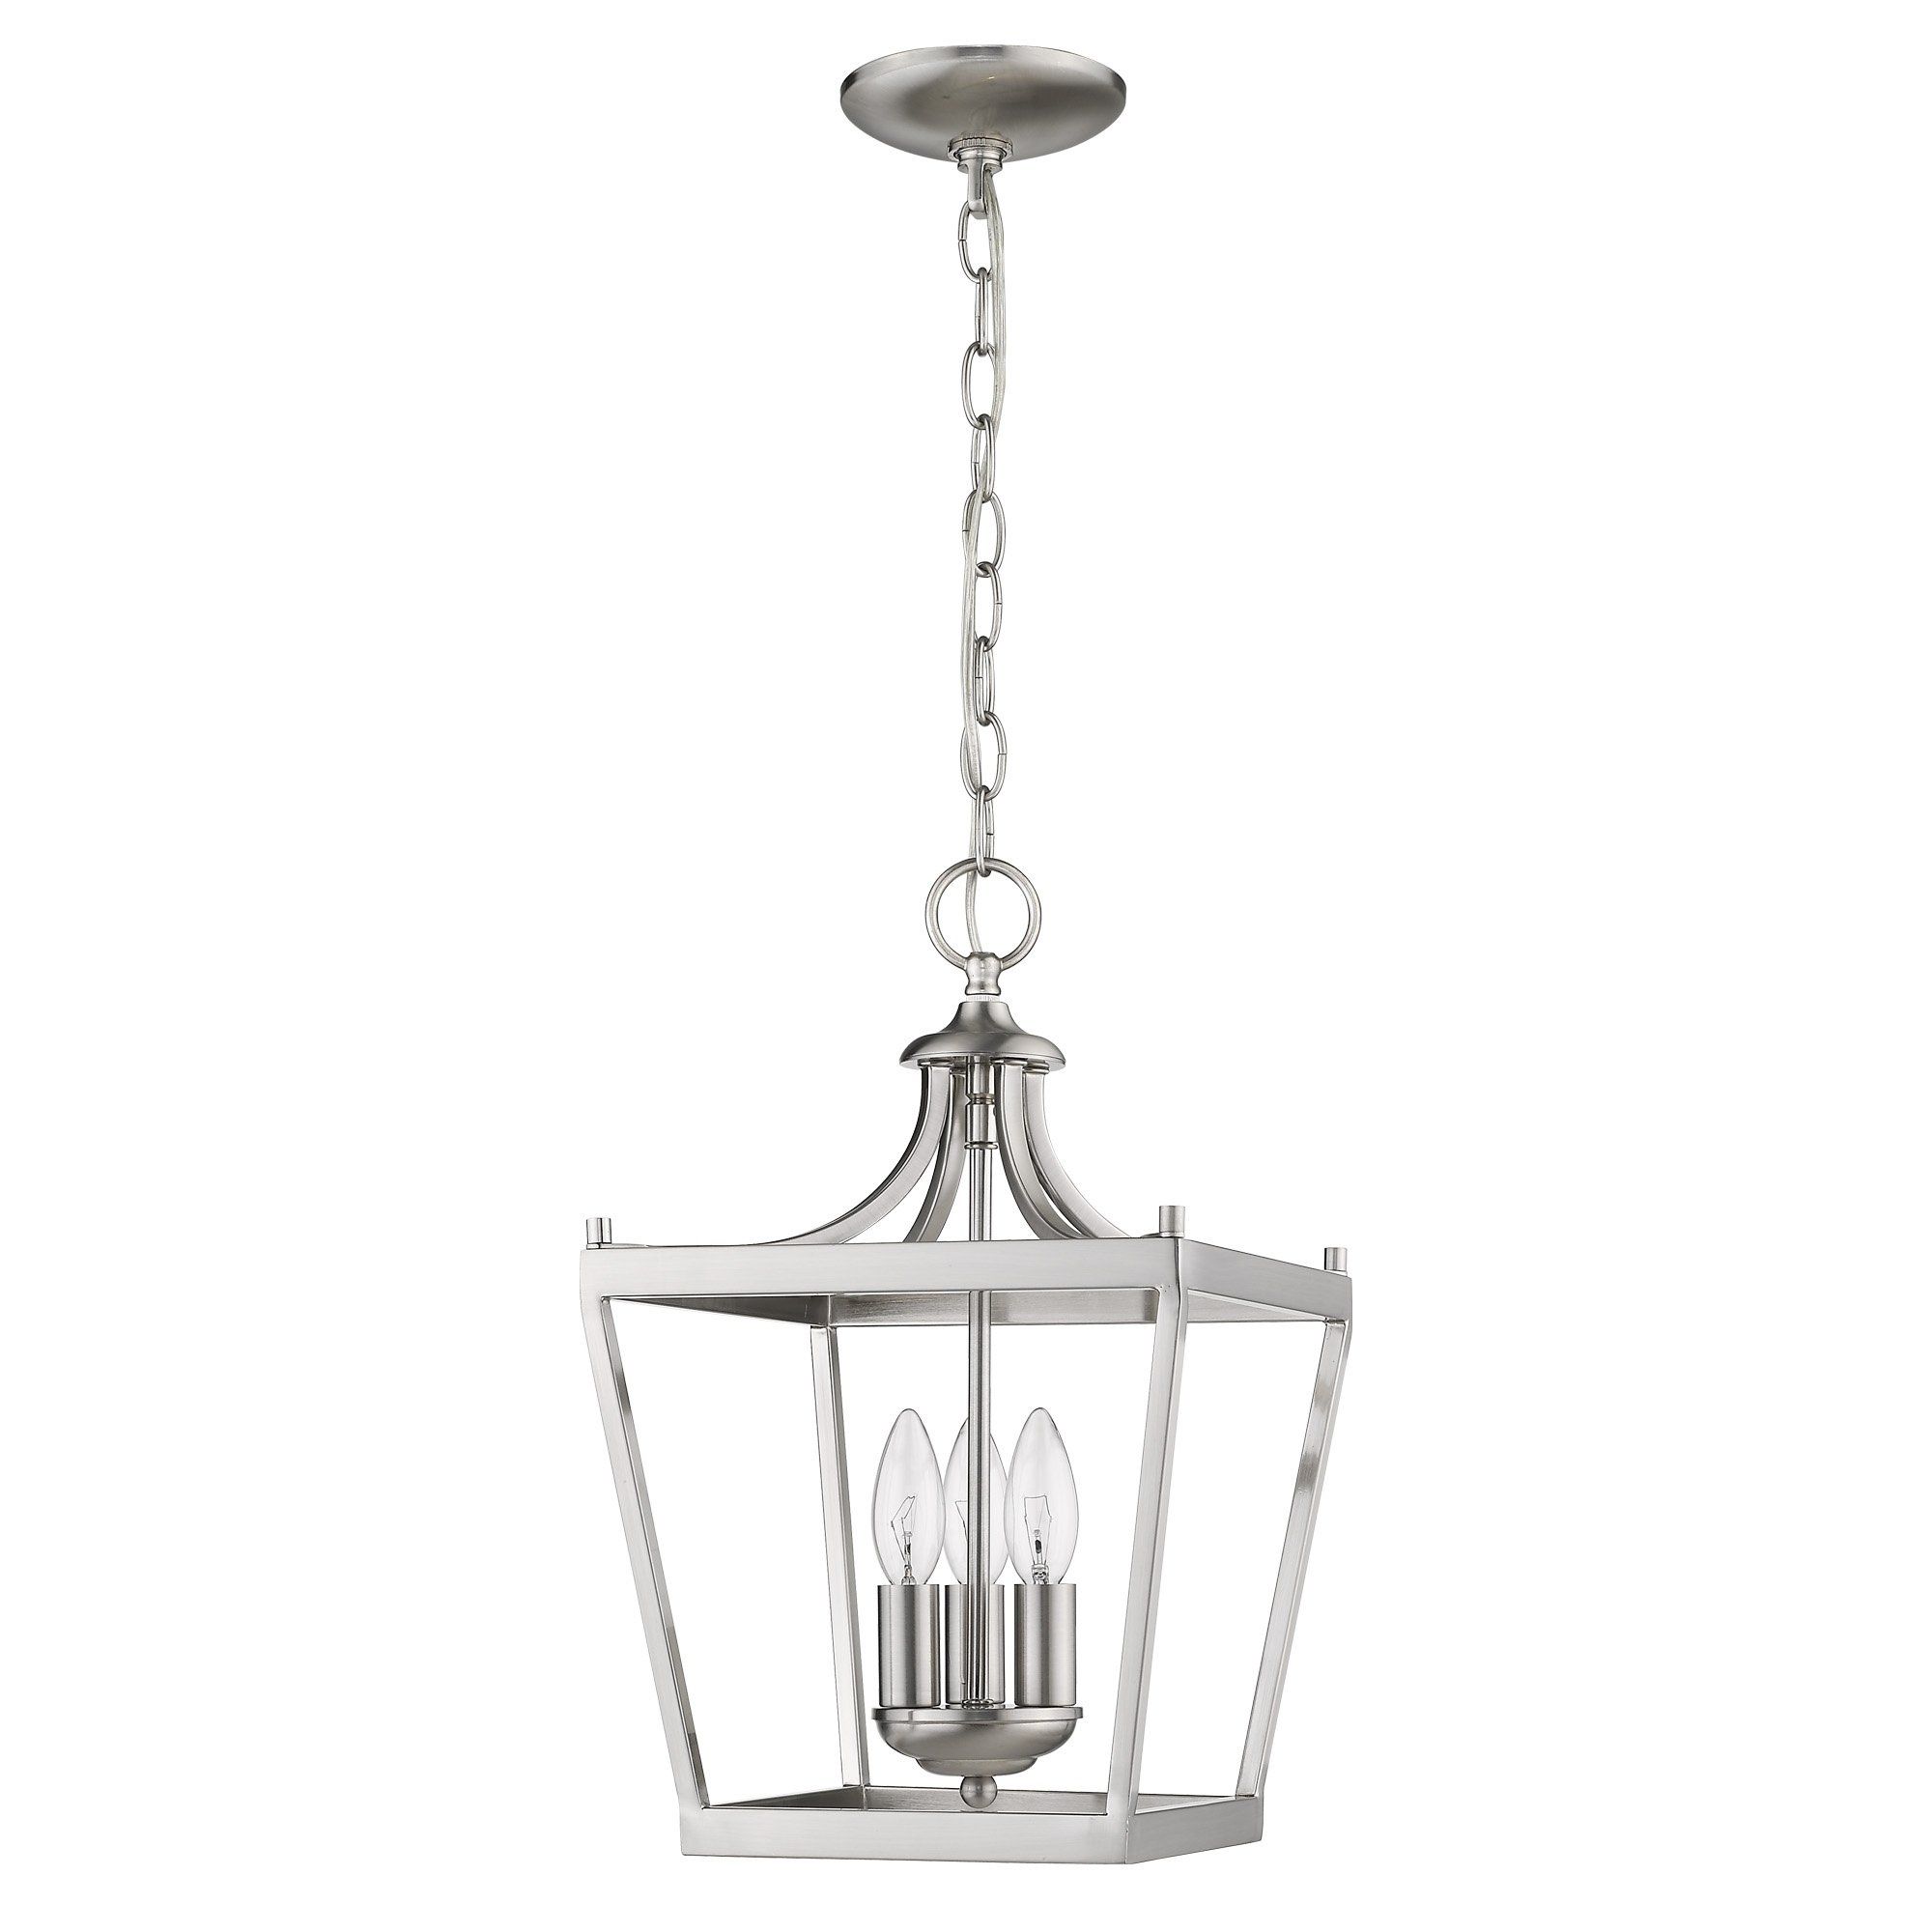 Acclaim Lighting Kennedy 3 Light Satin Nickel Chandelier With Pickensville 6 Light Wagon Wheel Chandeliers (View 23 of 30)